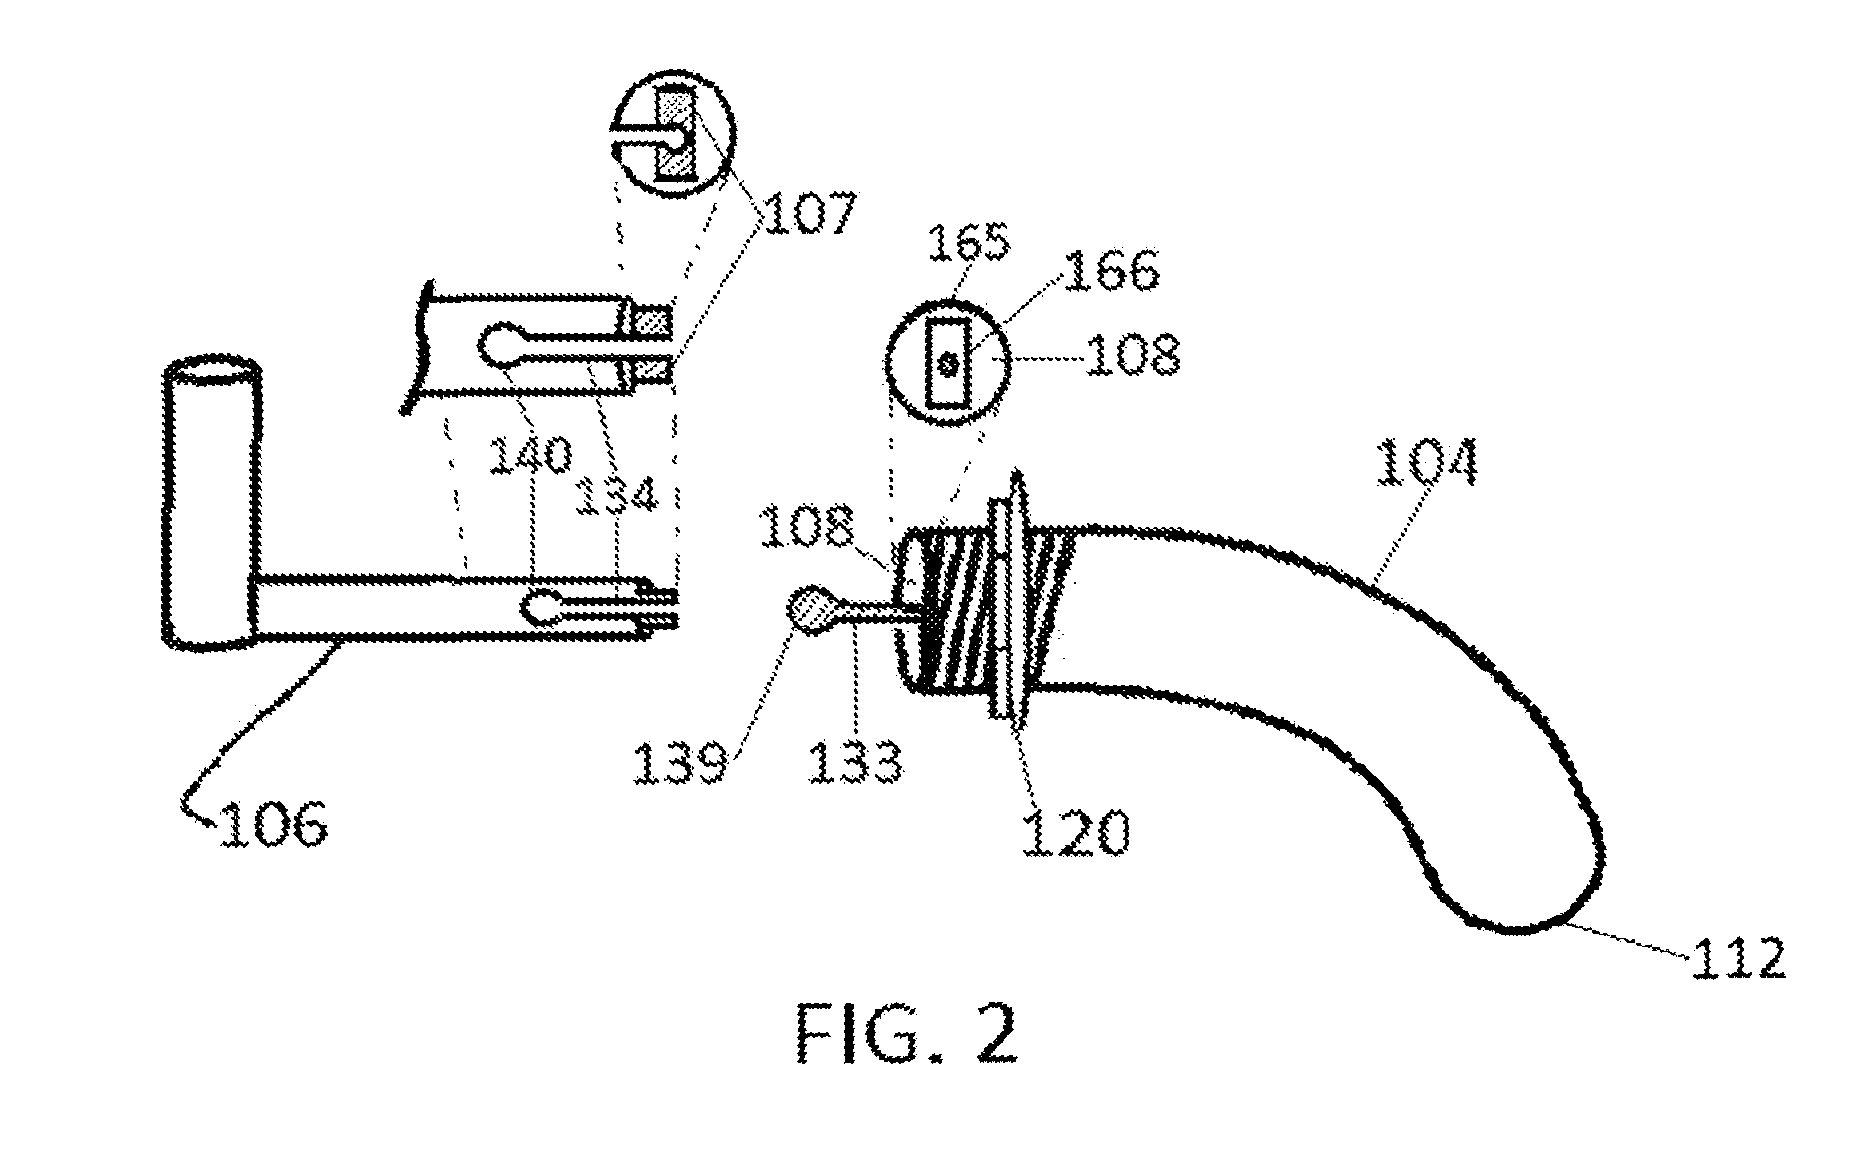 Apparatus for repositioning the vagina, cervix, uterus and pelvic floor and method for securing same